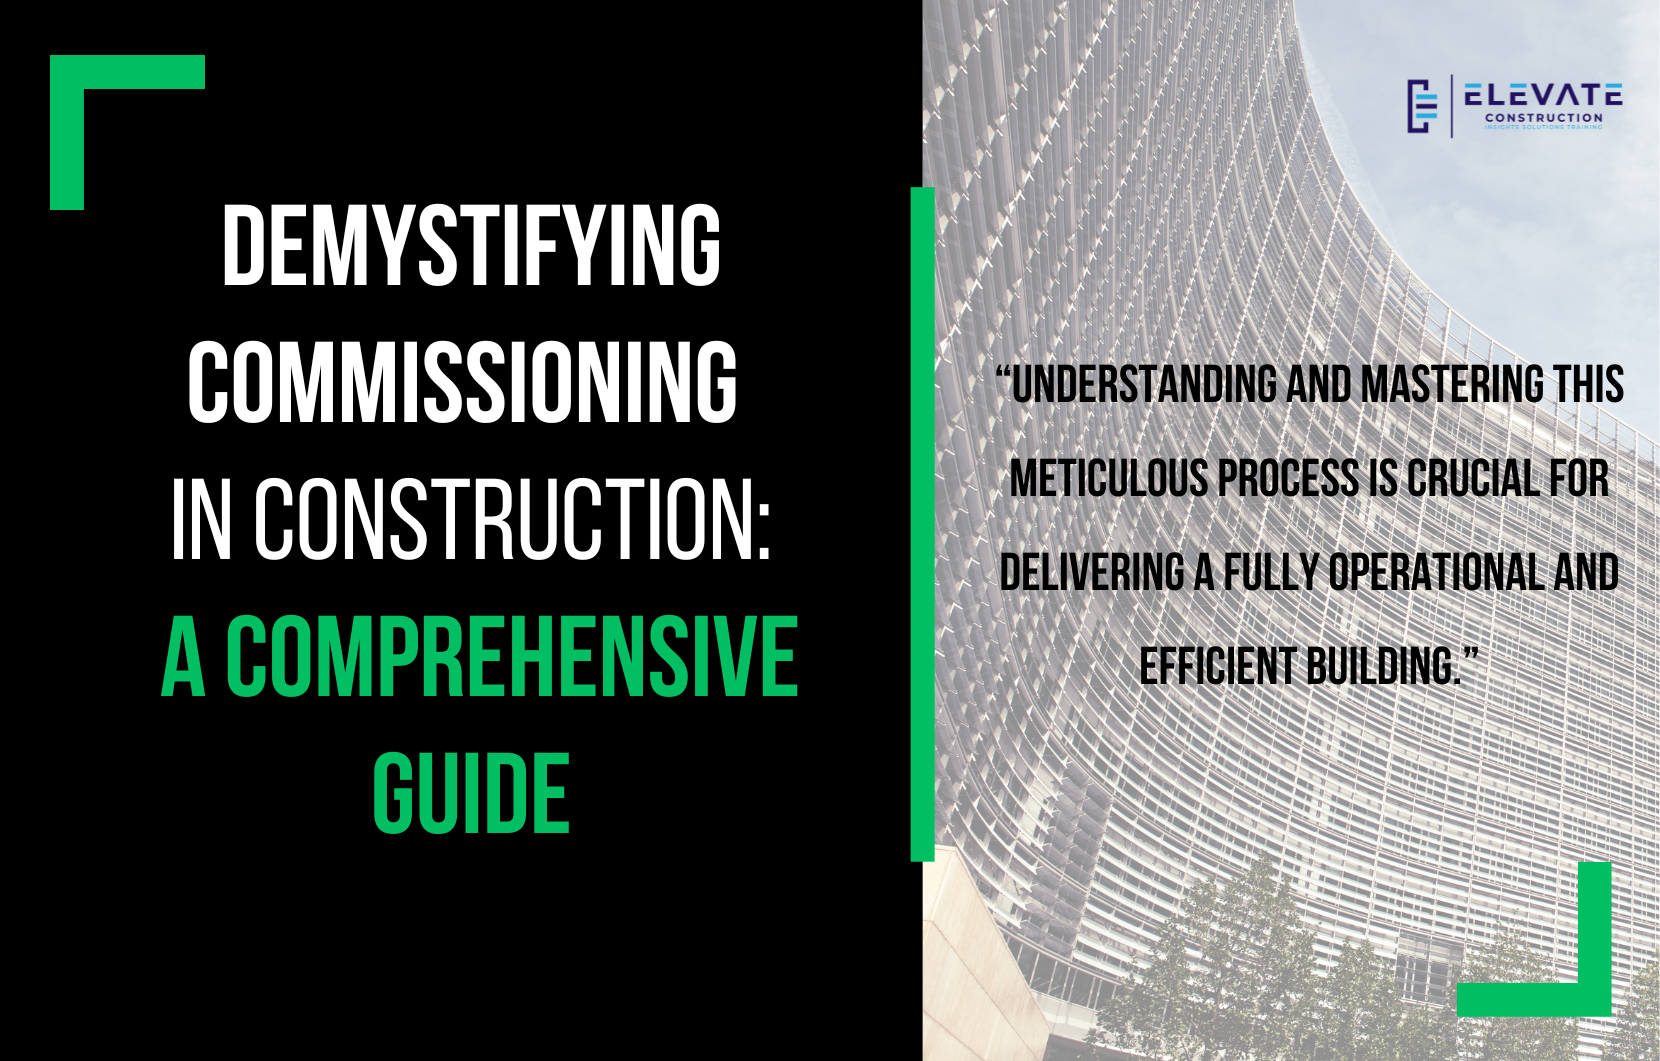 Demystifying Commissioning in Construction: A Comprehensive Guide